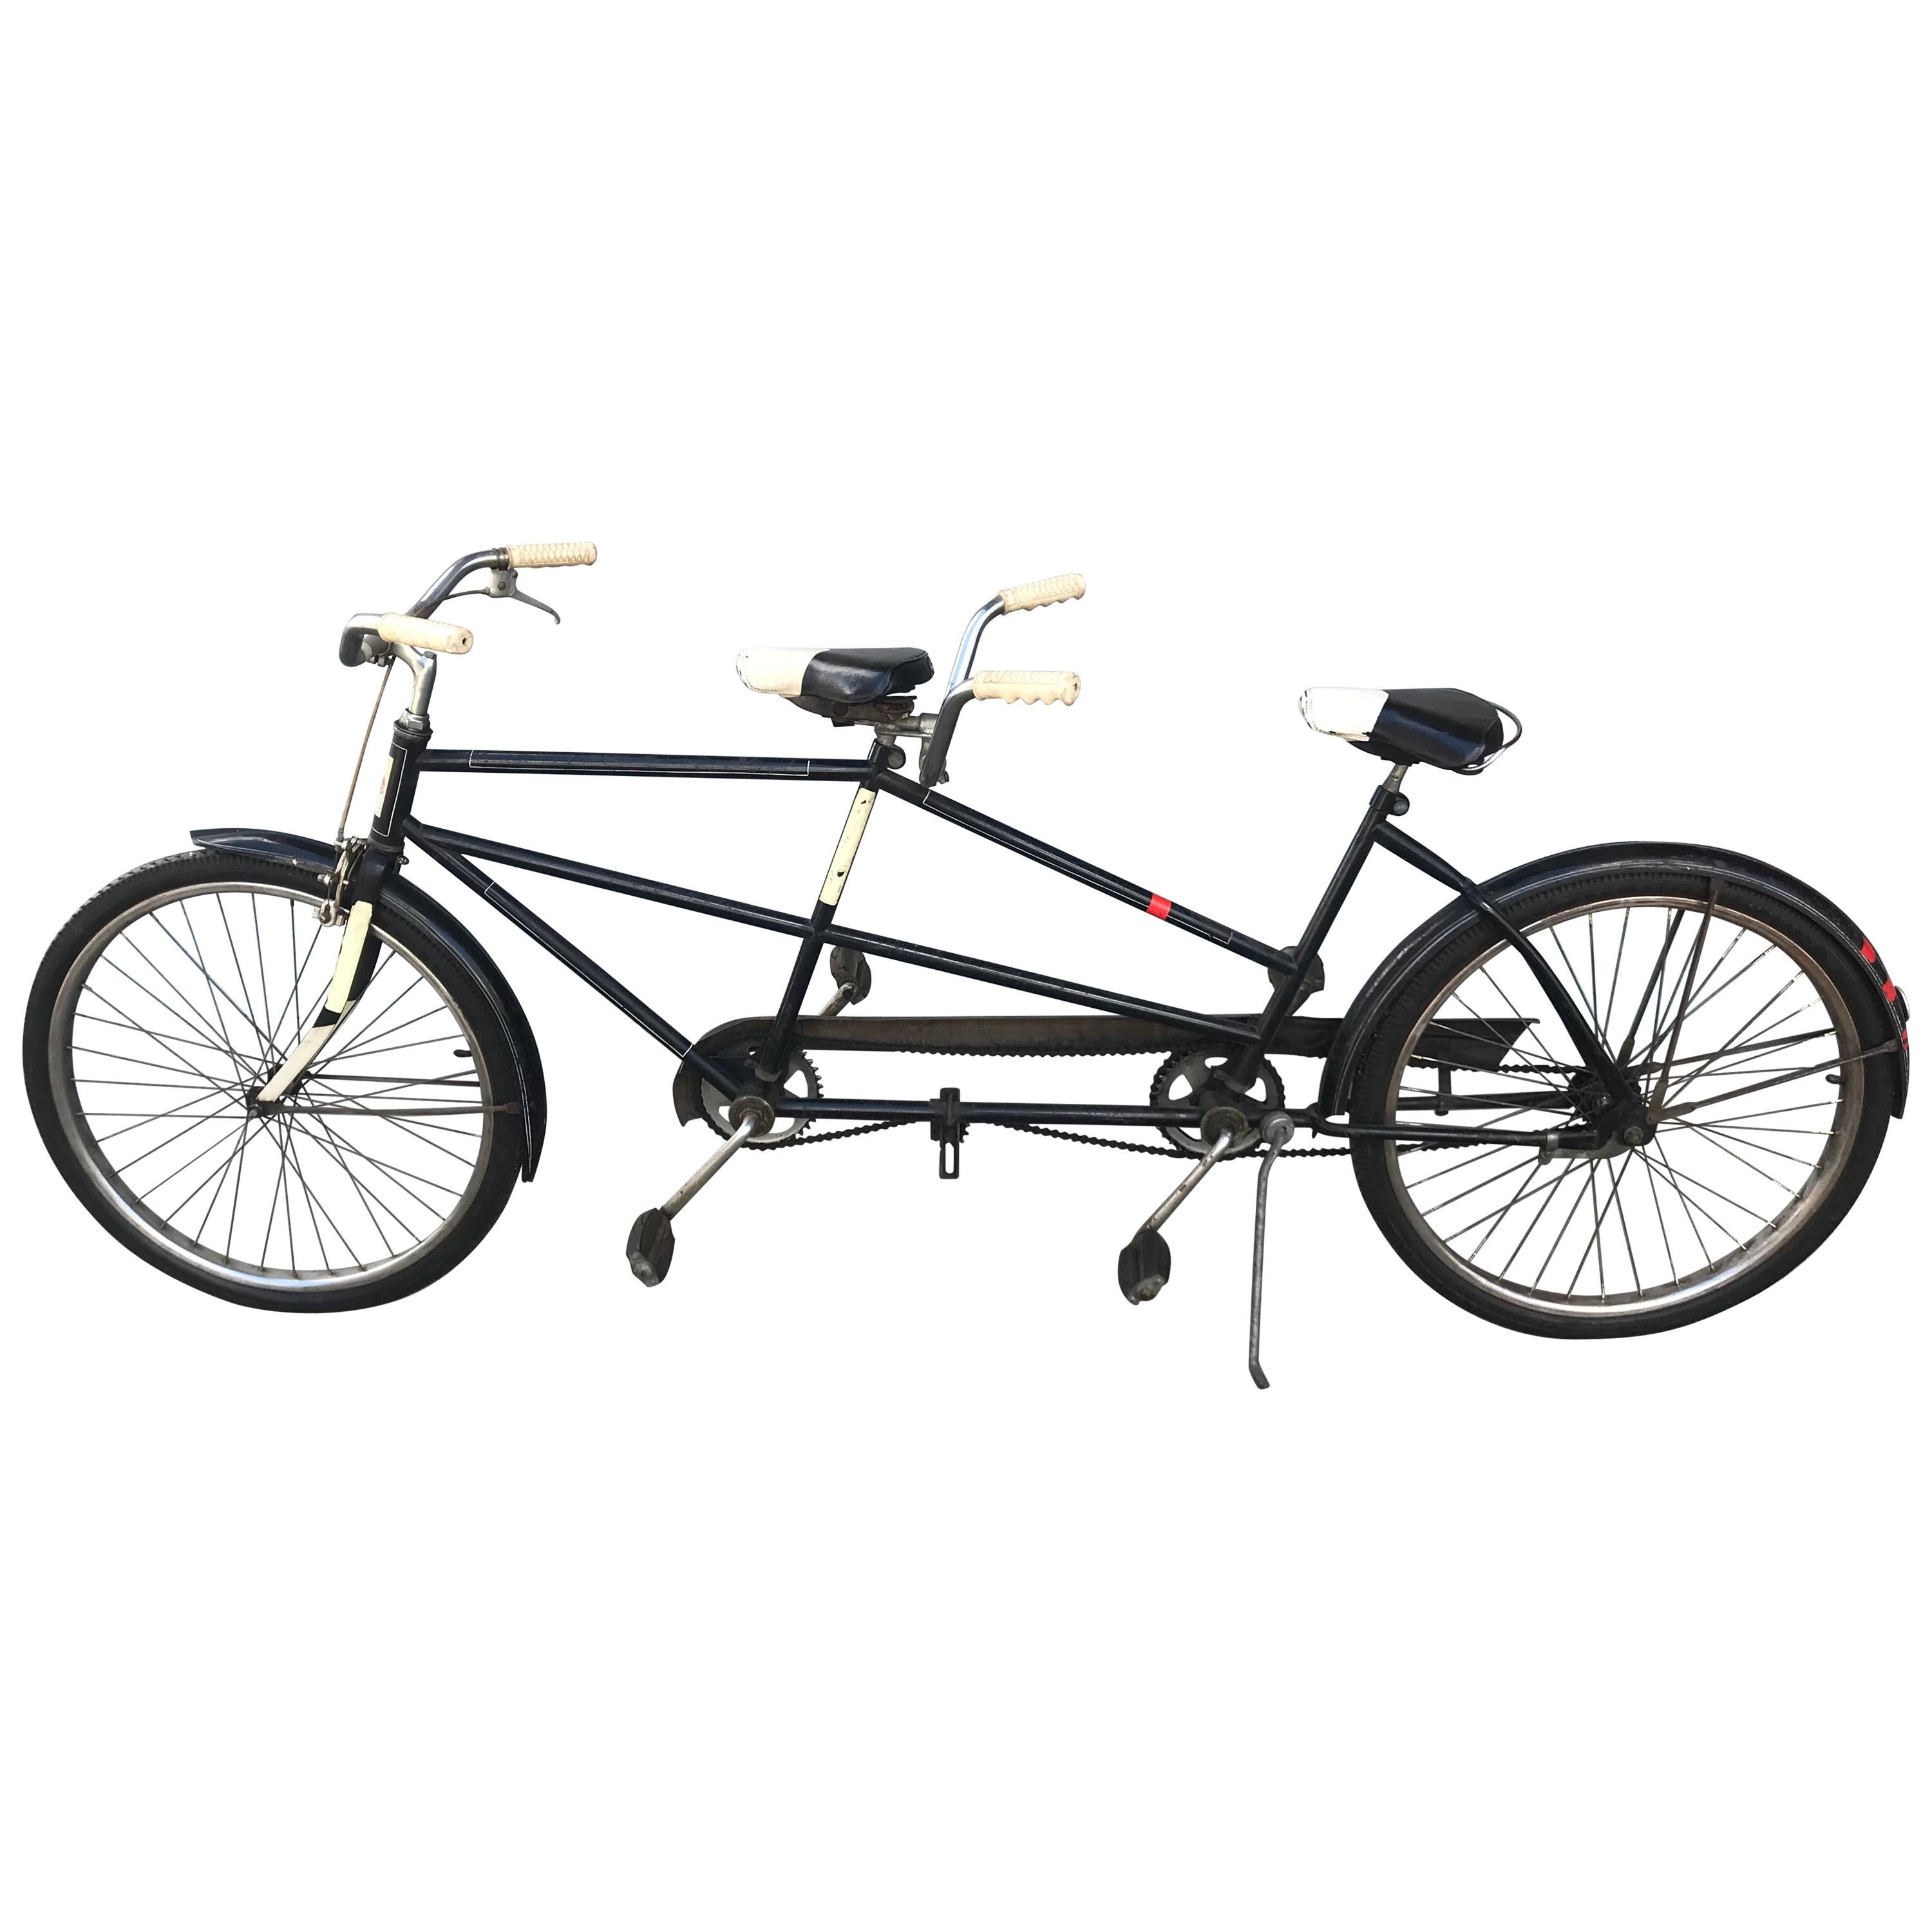 Classic 1950s Tandem Bike, Bicycle Built for Two by J C Higgins